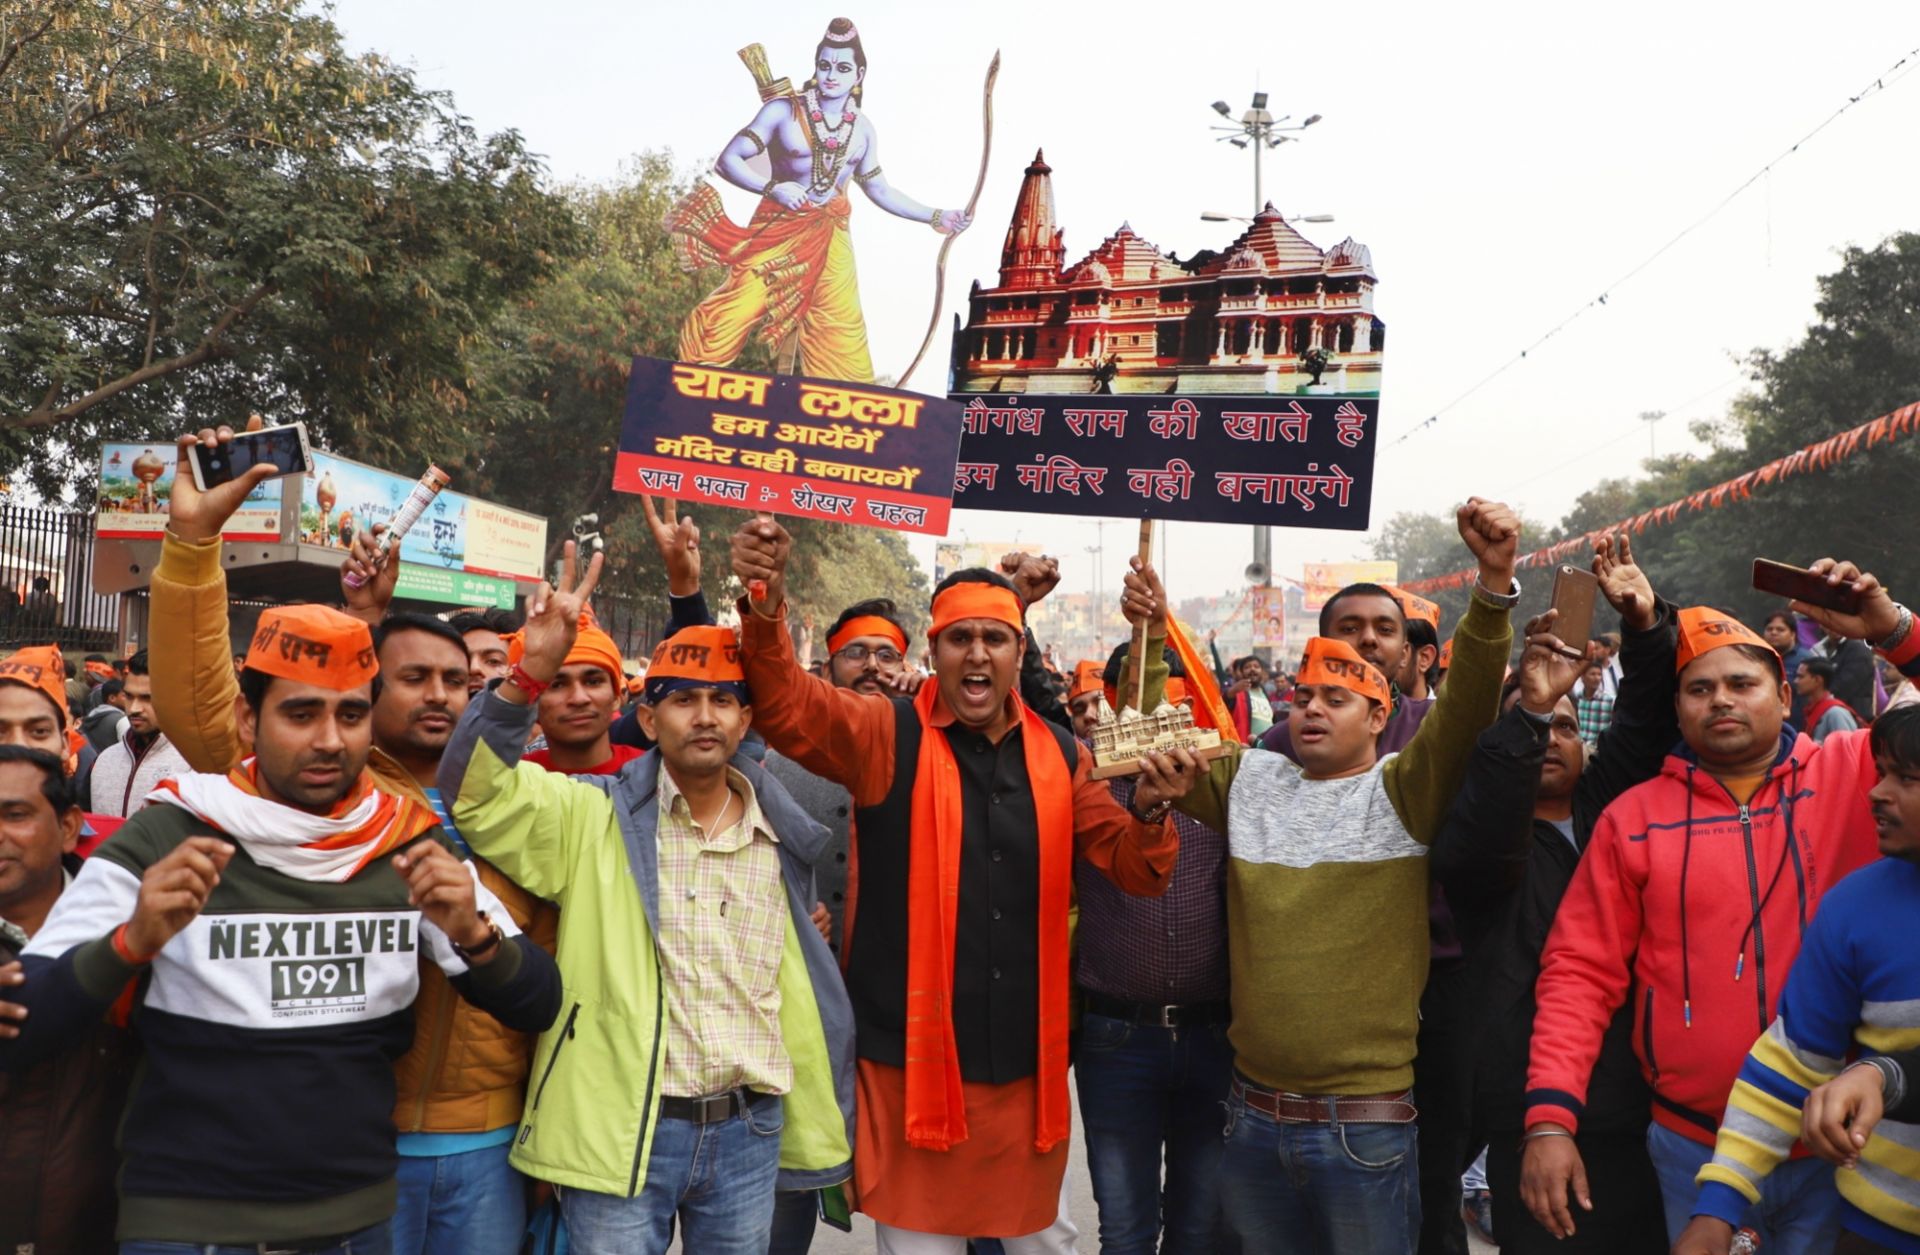 Supporters of the Vishva Hindu Parishad, a Hindu nationalist organization, attend a religious congregation organized by the group in New Delhi on Dec. 9, 2018. 